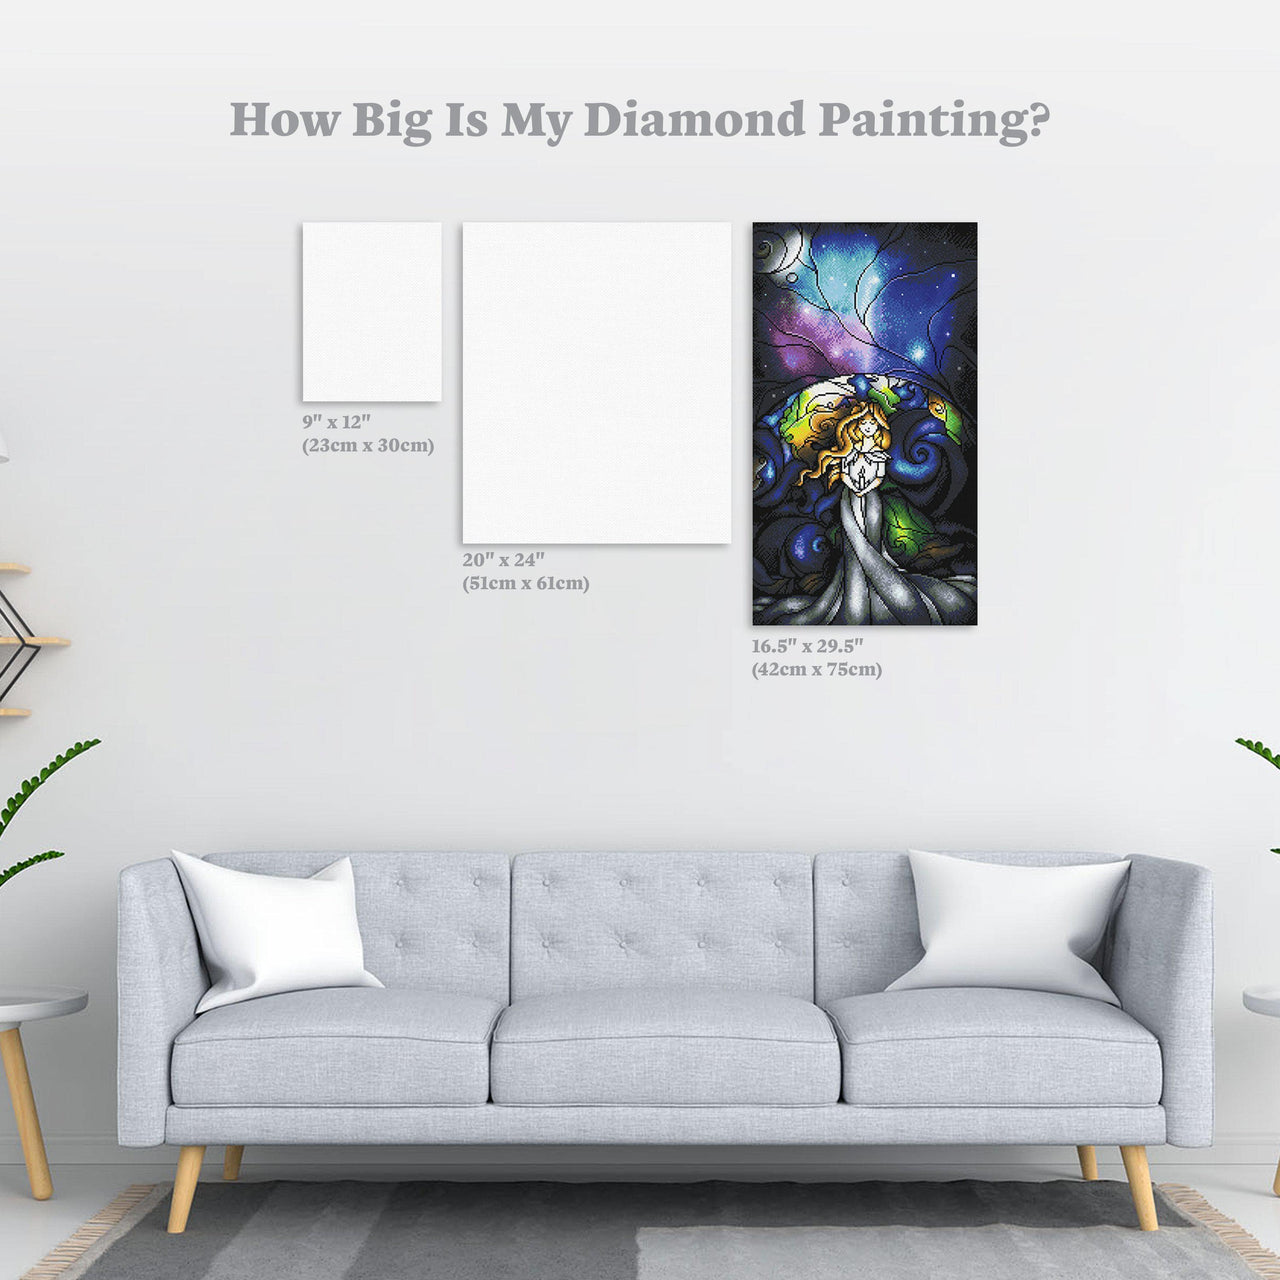 Diamond Painting This Little Light of Mine 16.5" x 29.5" (42cm x 75cm) / Round With 42 Colors Including 2 ABs